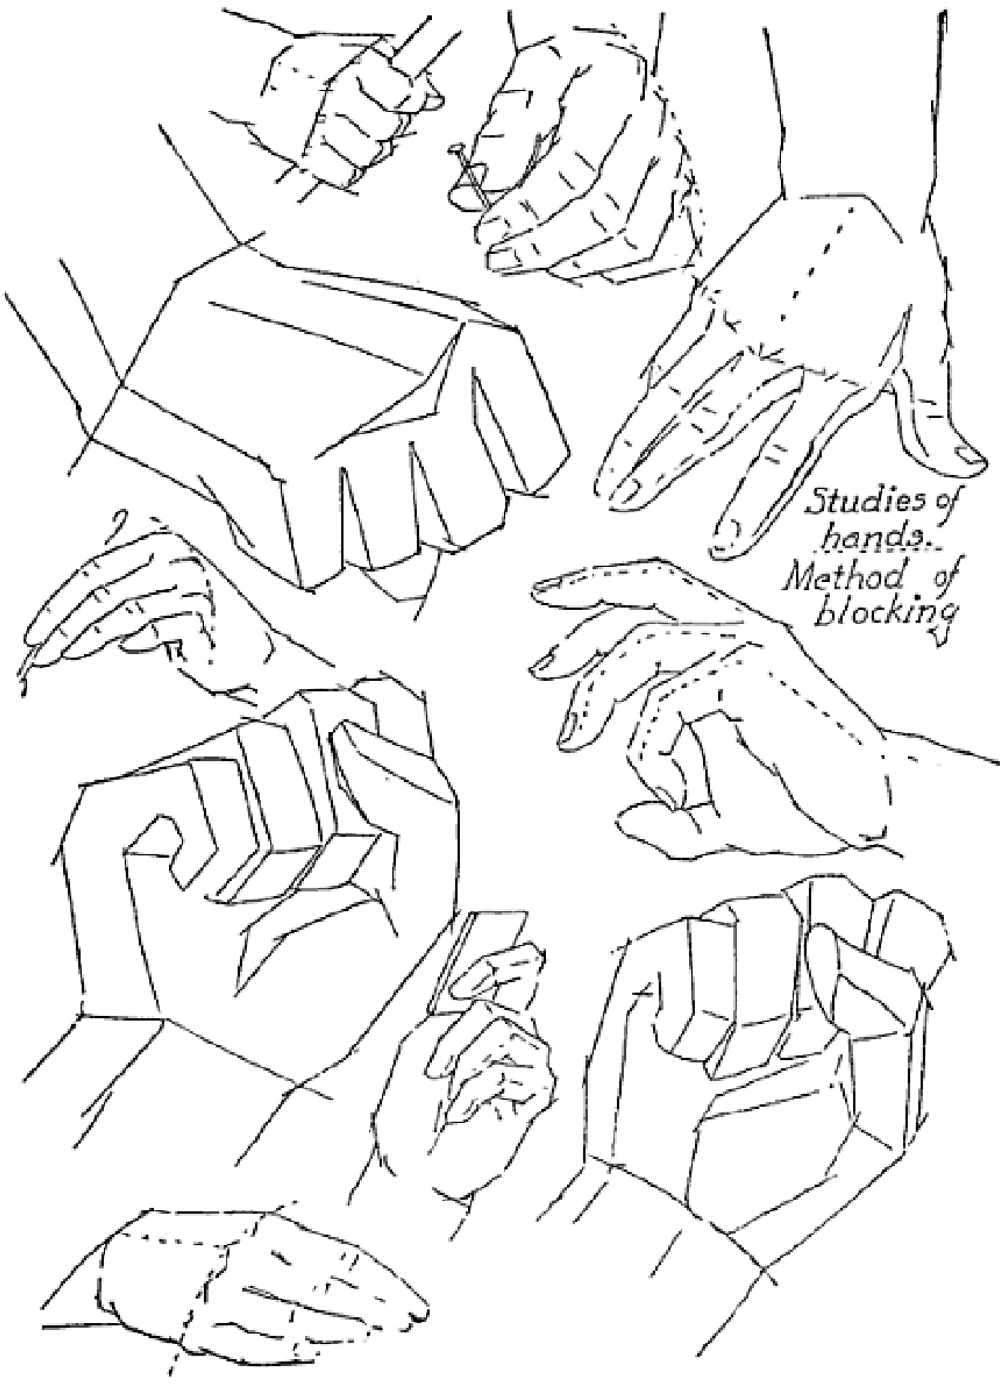 Drawing Hands : Techniques for How to Draw Hands With References and